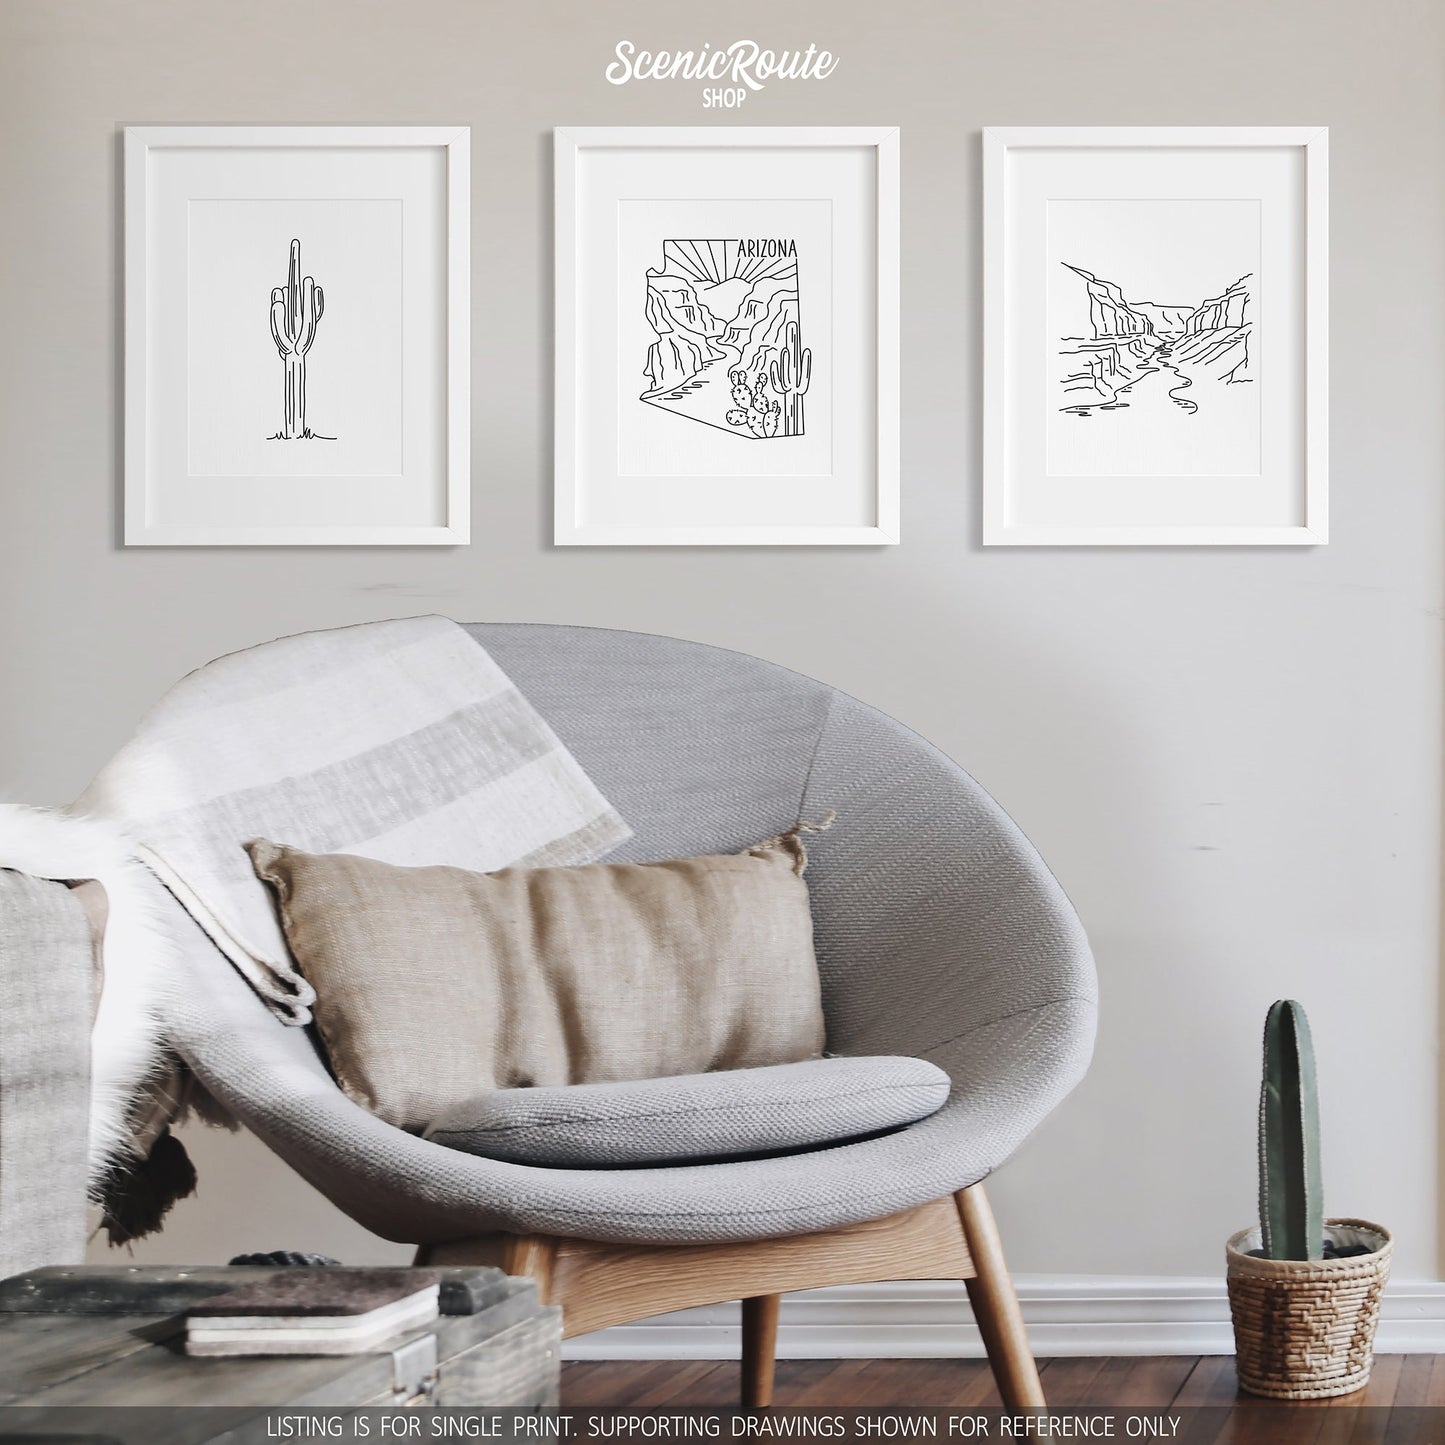 A group of three framed drawings on a white wall hanging above a round chair. The line art drawings include  a Saguaro Cactus, the Arizona State Outline, and Grand Canyon National Park